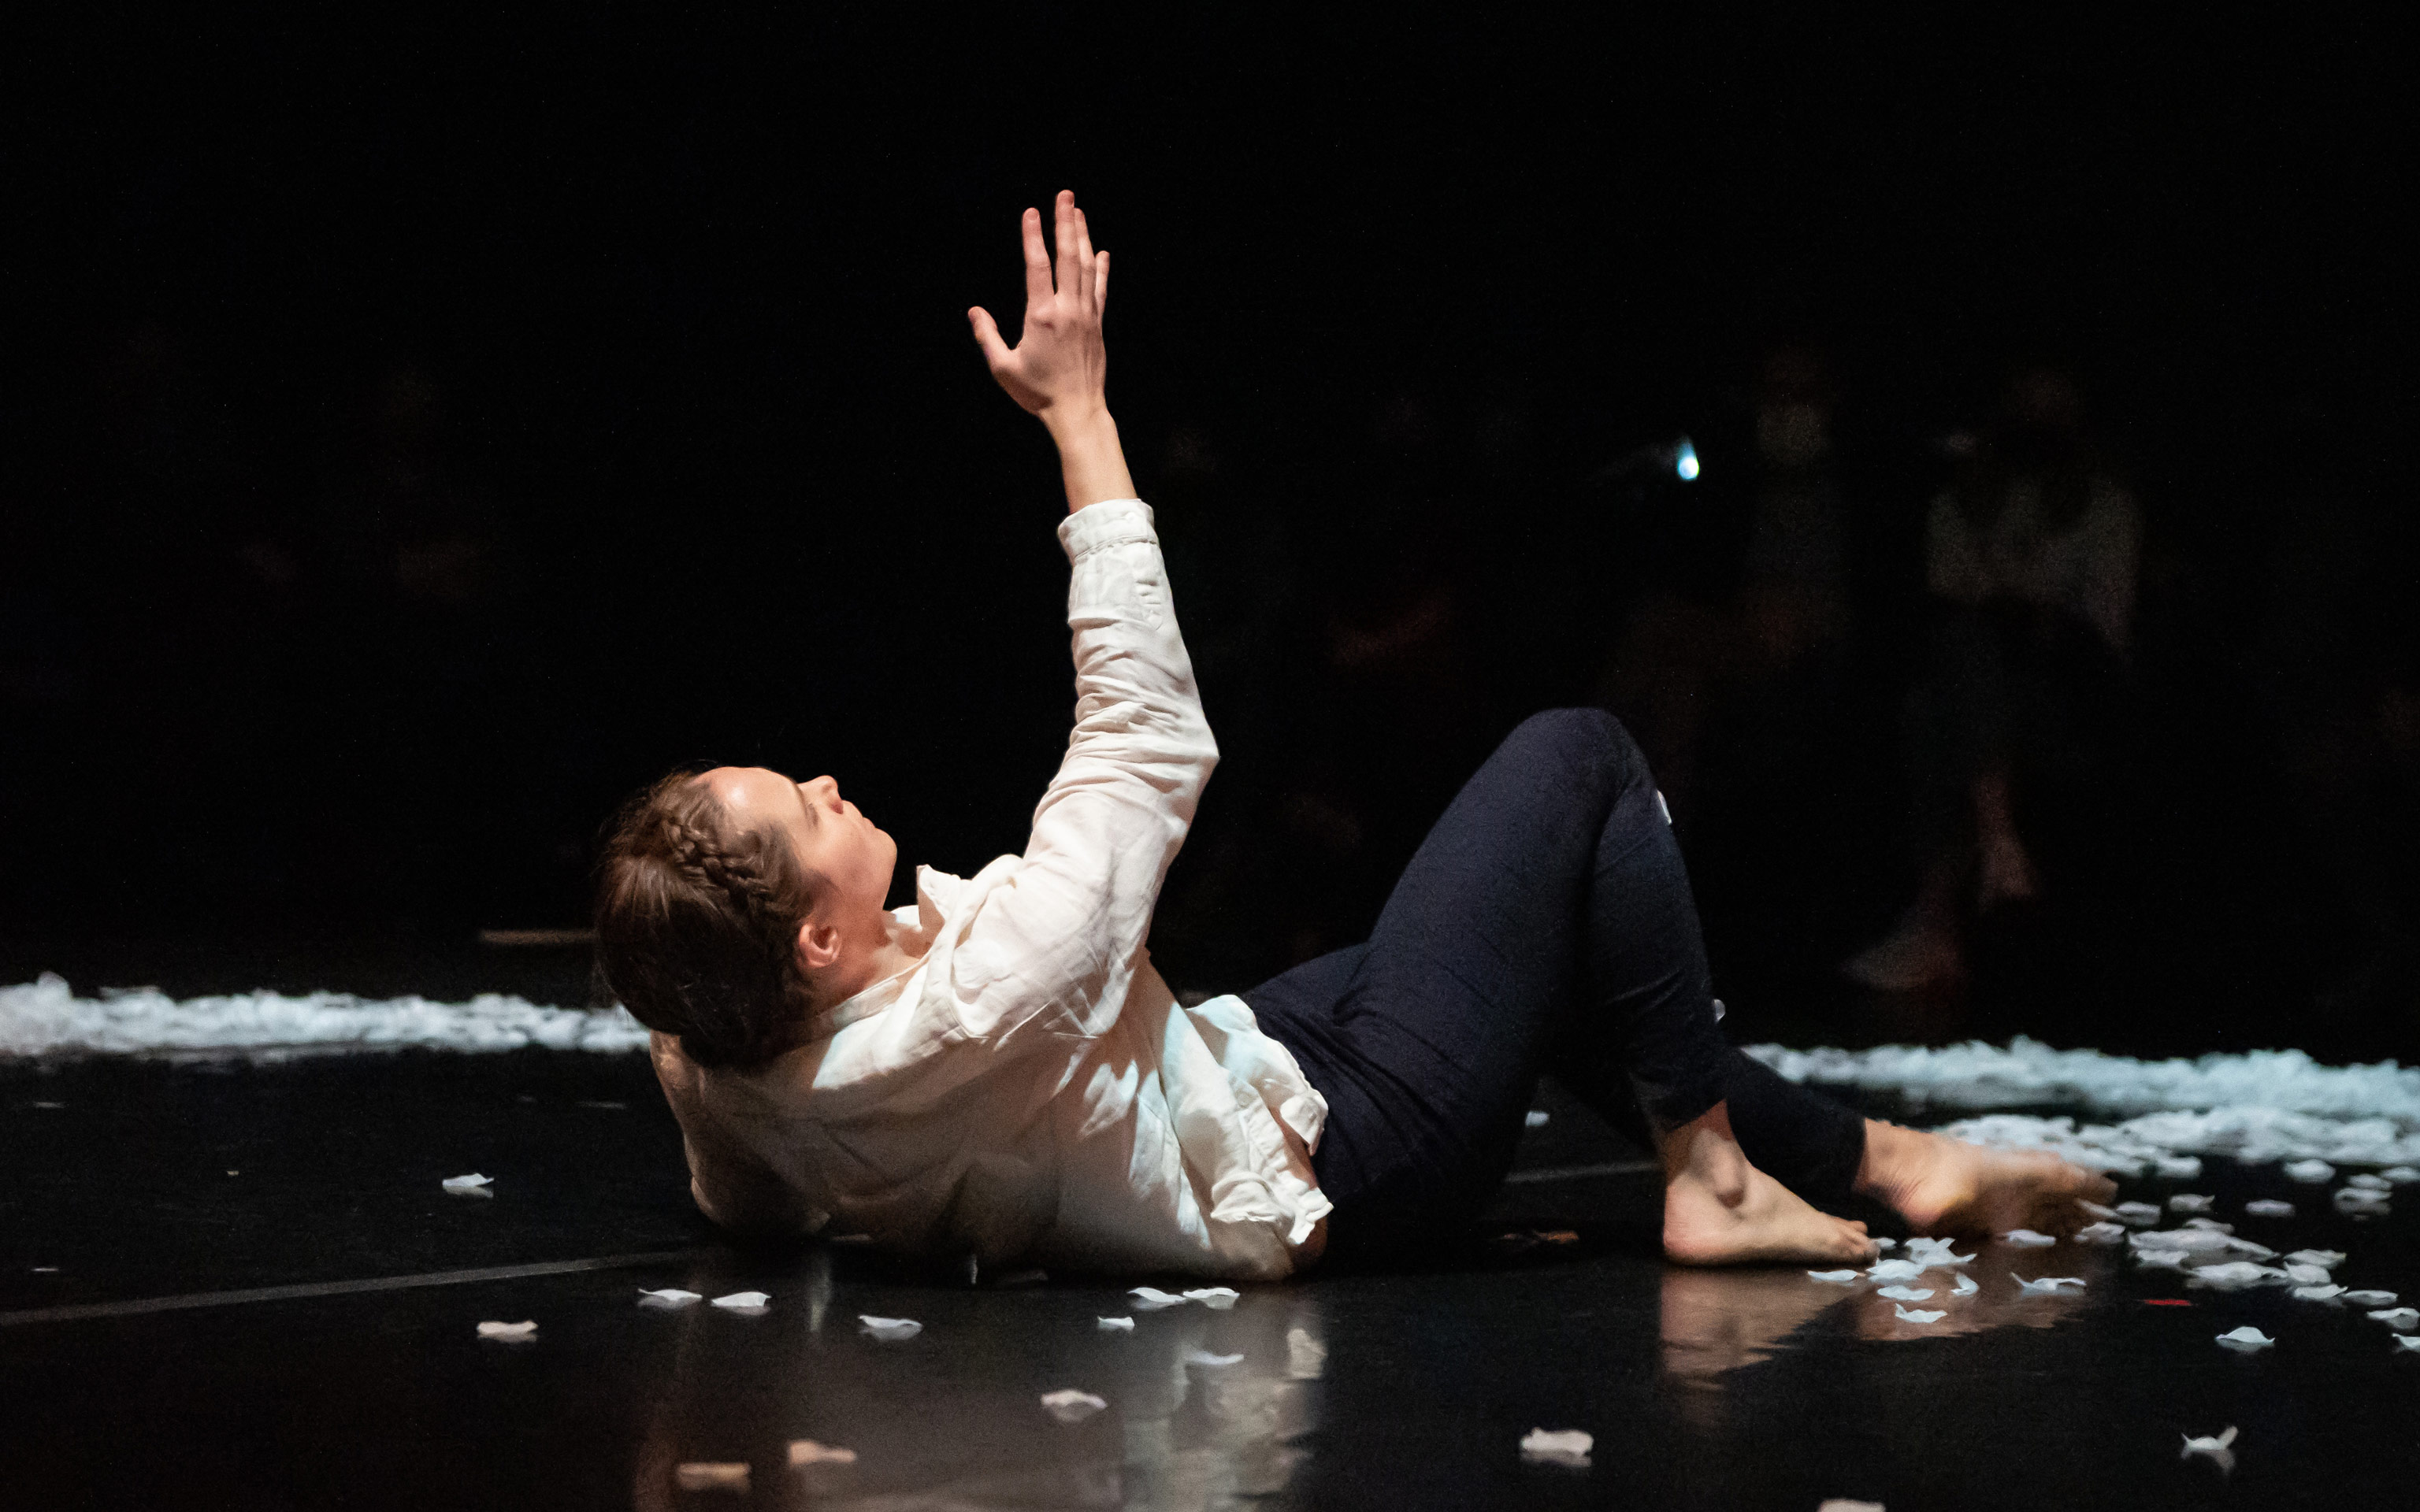 push/FOLD dancer Holly Shaw reaches up while performing at Union PDX - Festival:21 at the Hampton Opera Center in Portland, Oregon | Photography: Jingzi Zhao